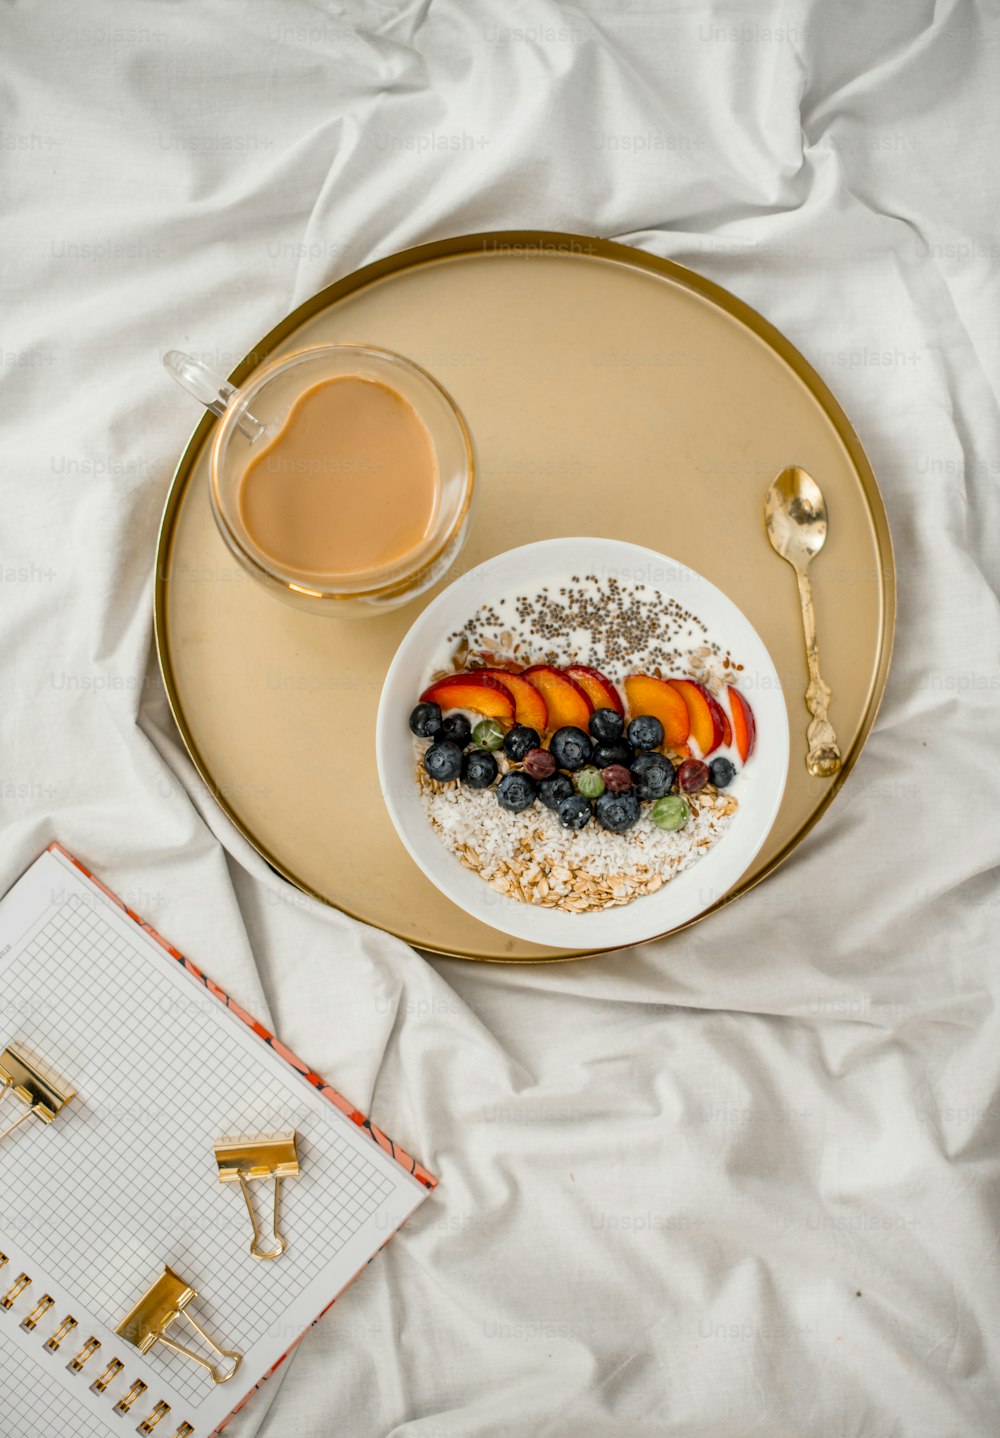 a plate of food and a cup of coffee on a bed